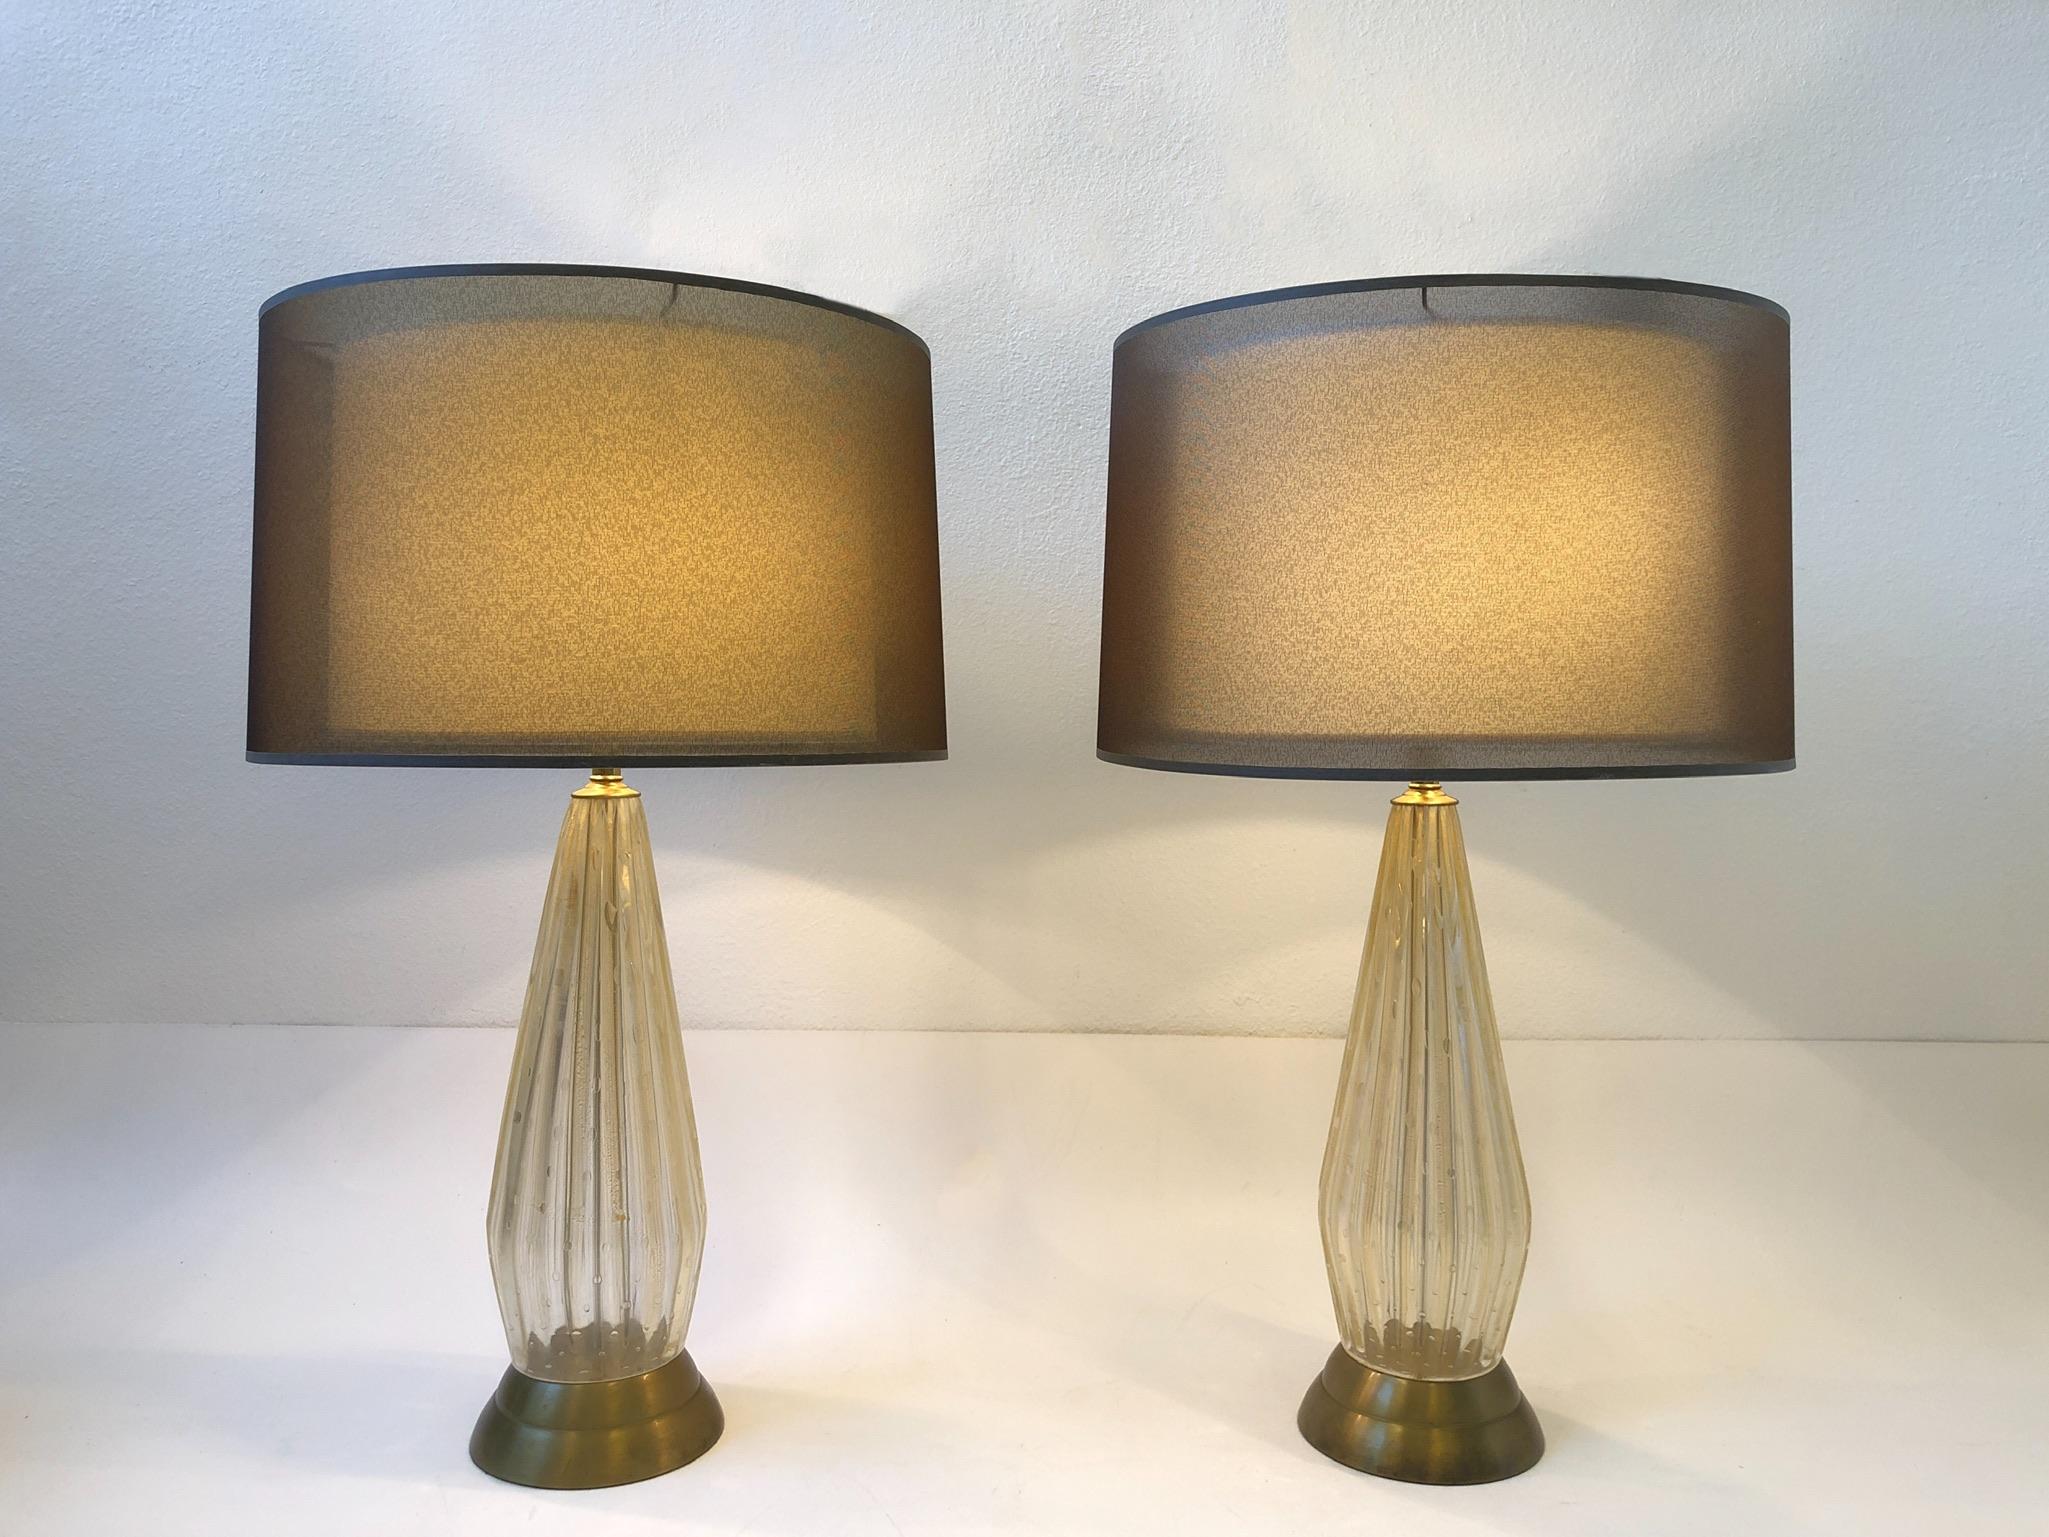 Pair of Italian Gold Dust Murano Glass and Brass Table Lamps by Marbro Lamp Co.  6